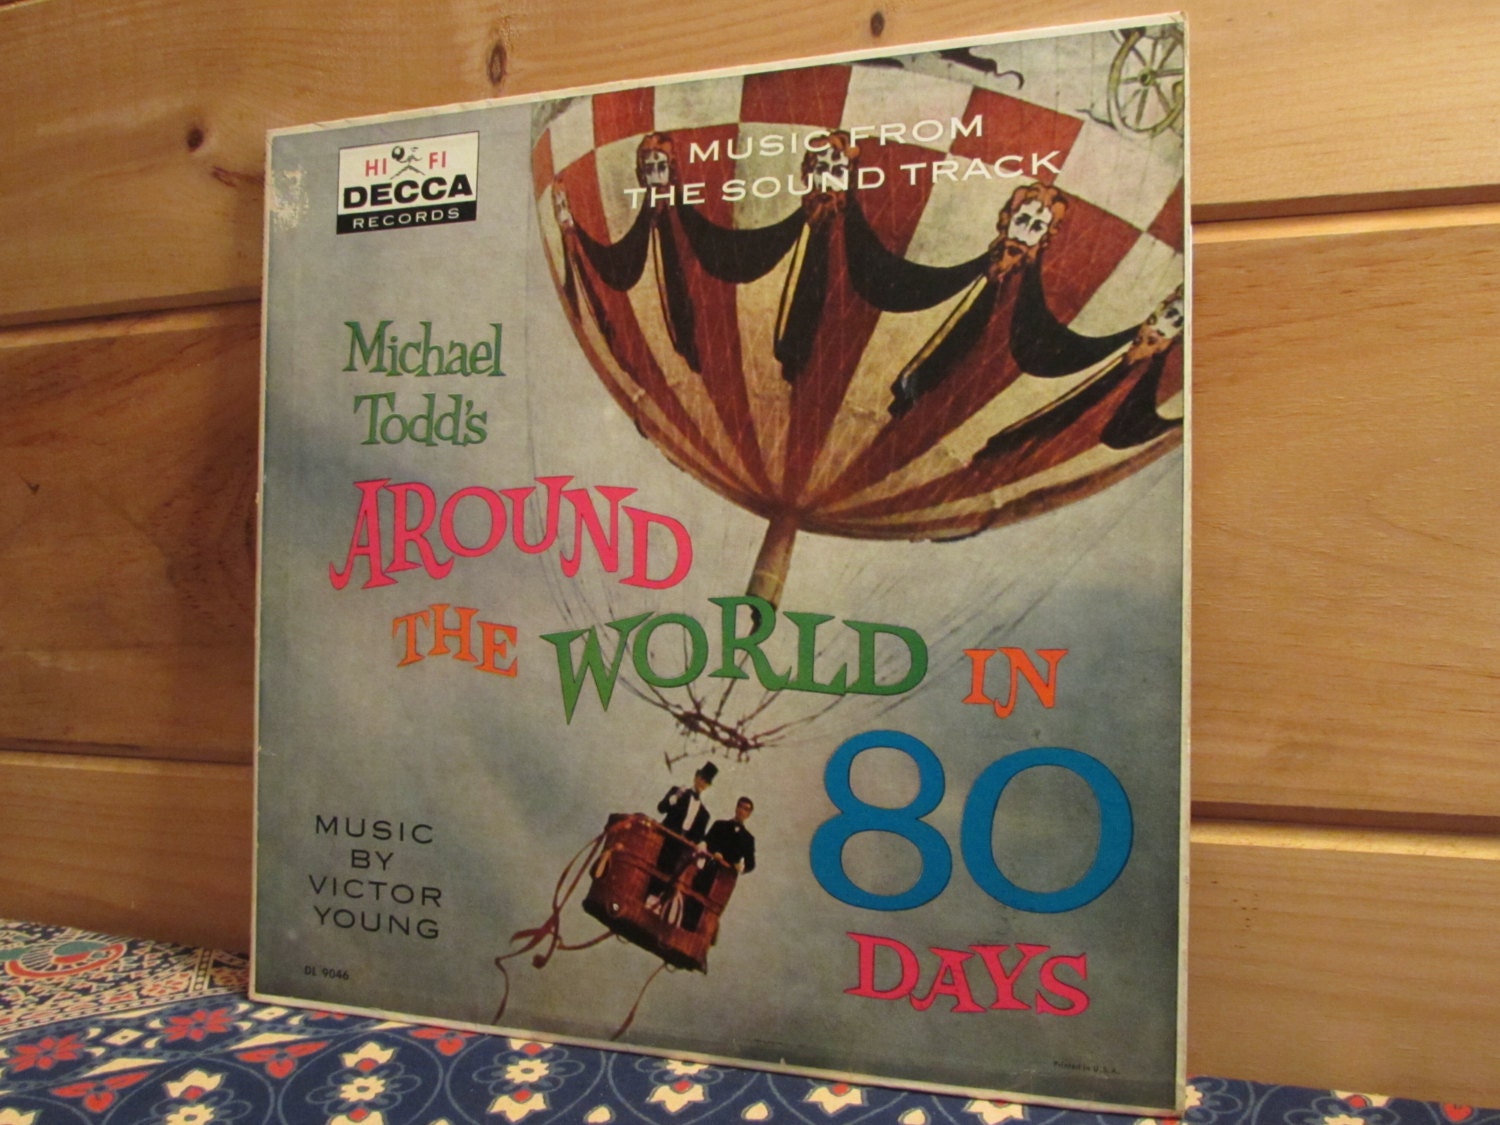 music from around the world in 80 days